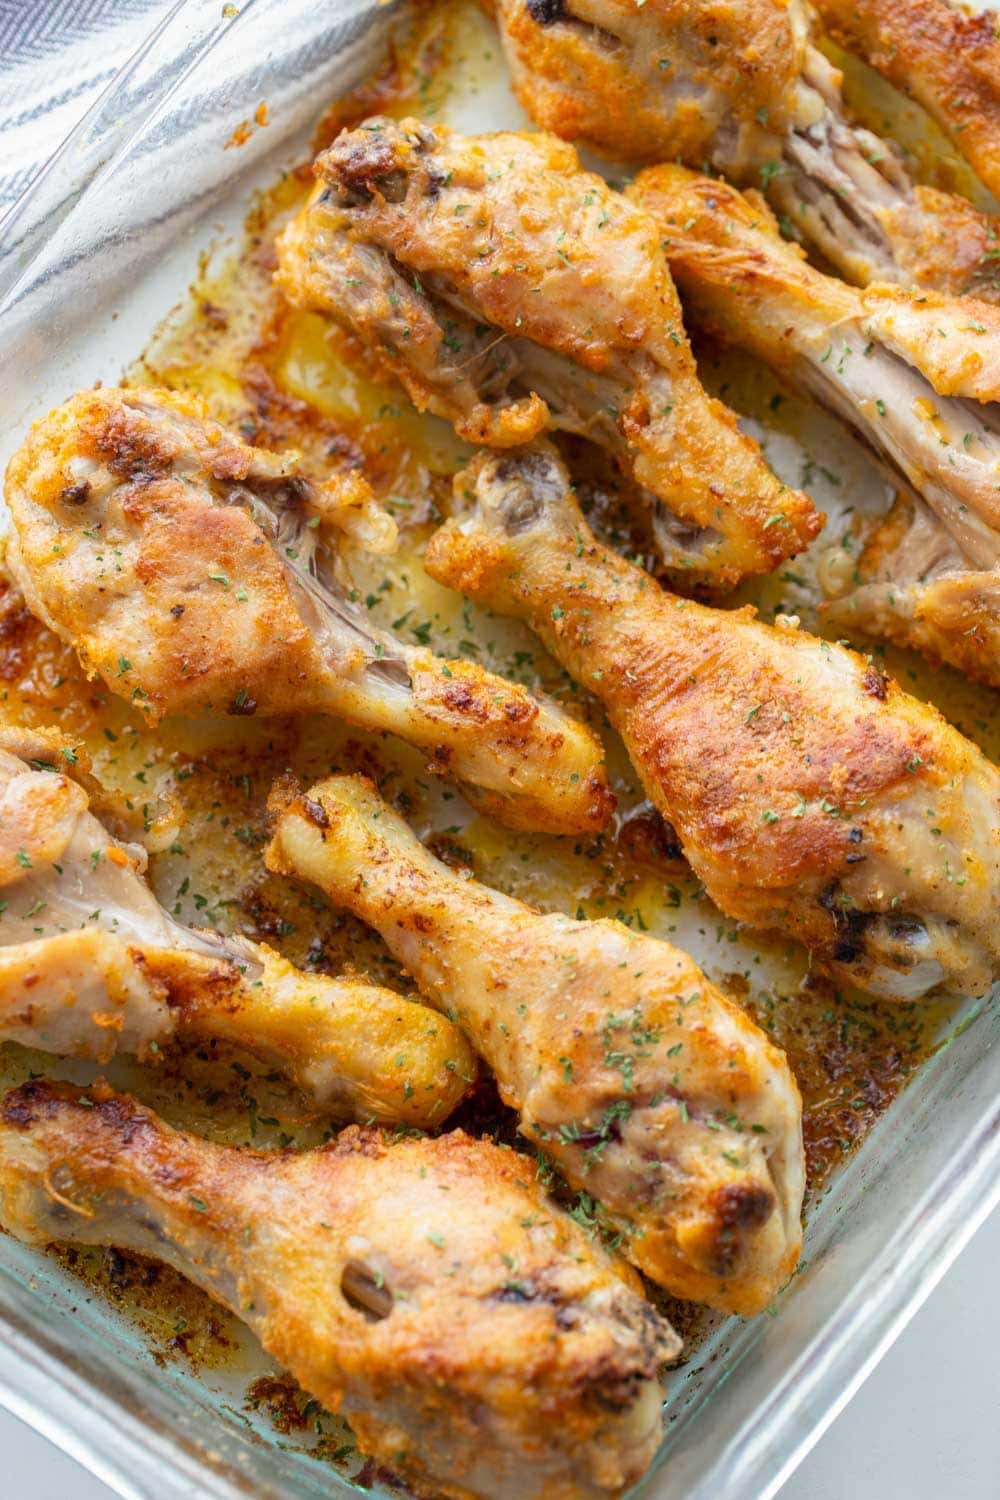 Easy Oven Baked Chicken Drumstick Recipes - BEST HOME DESIGN IDEAS